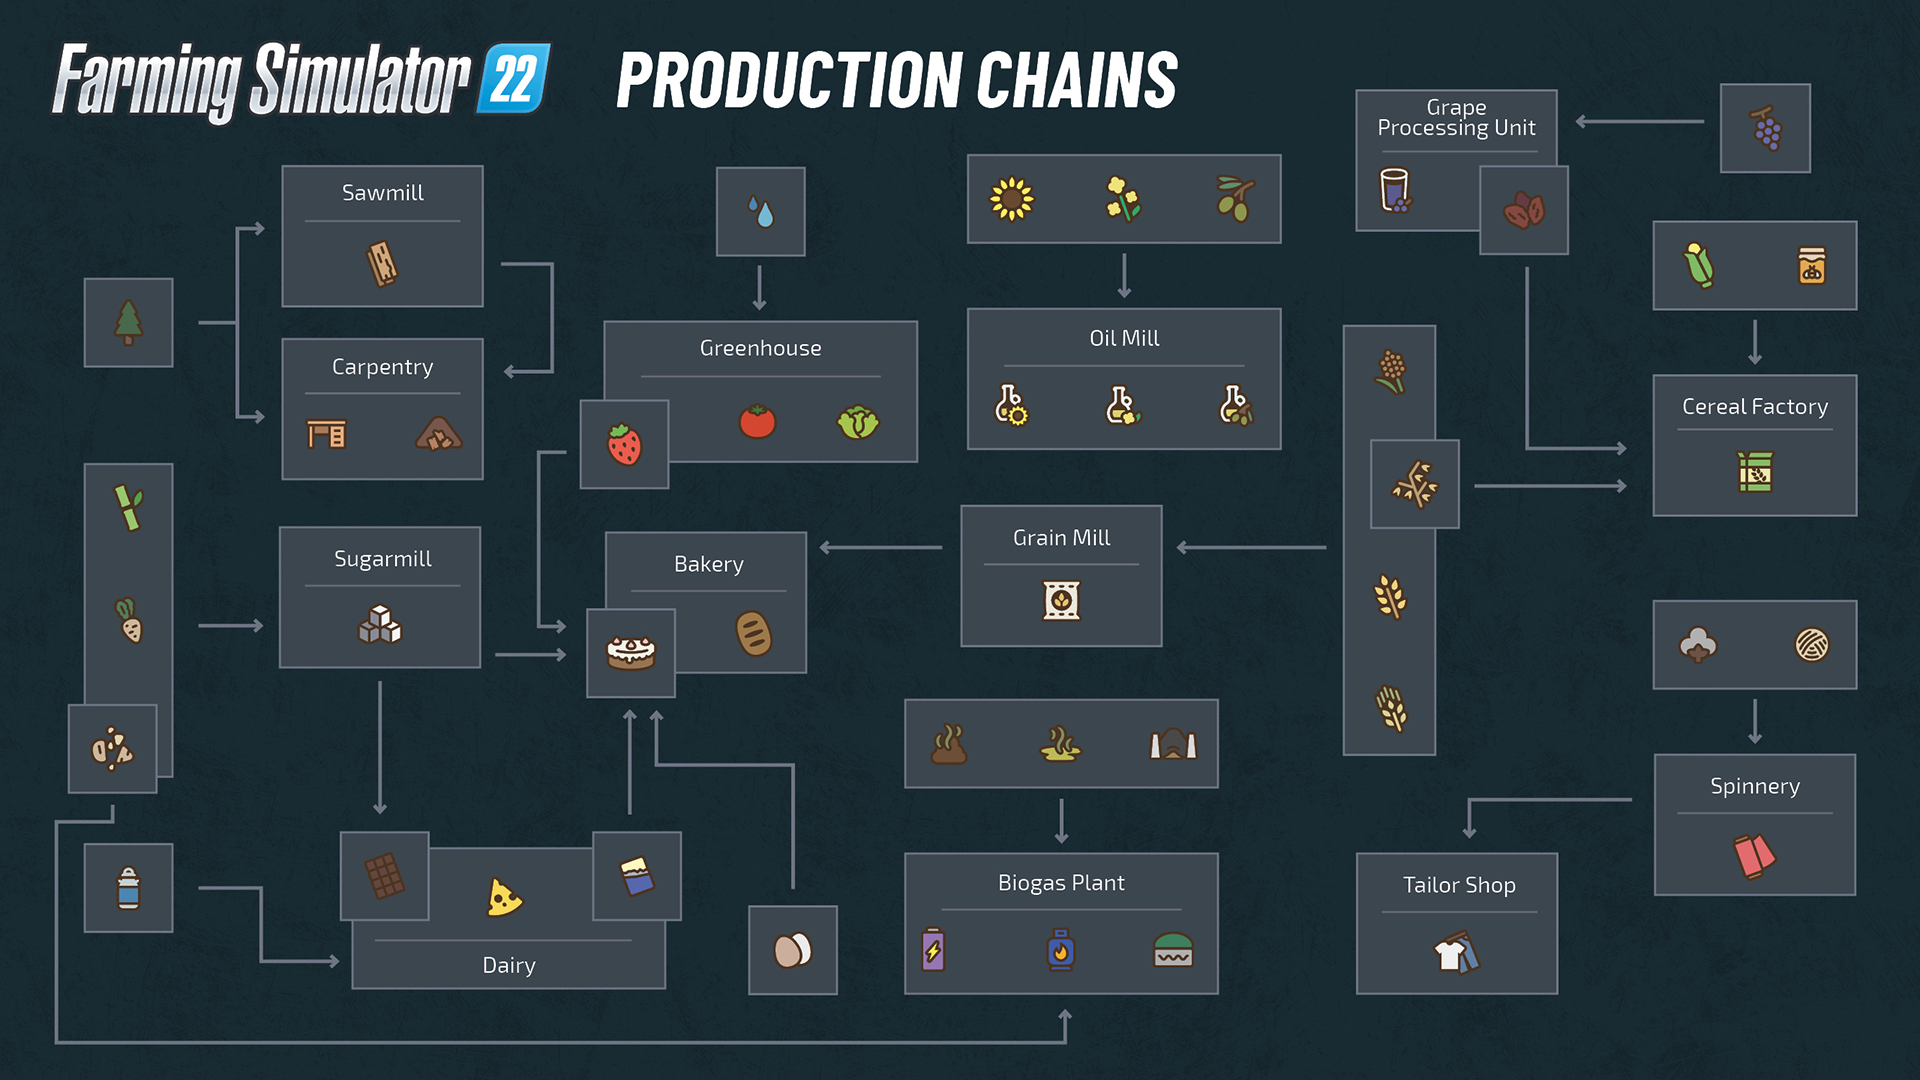 Production Chain Information Breakdown image 7